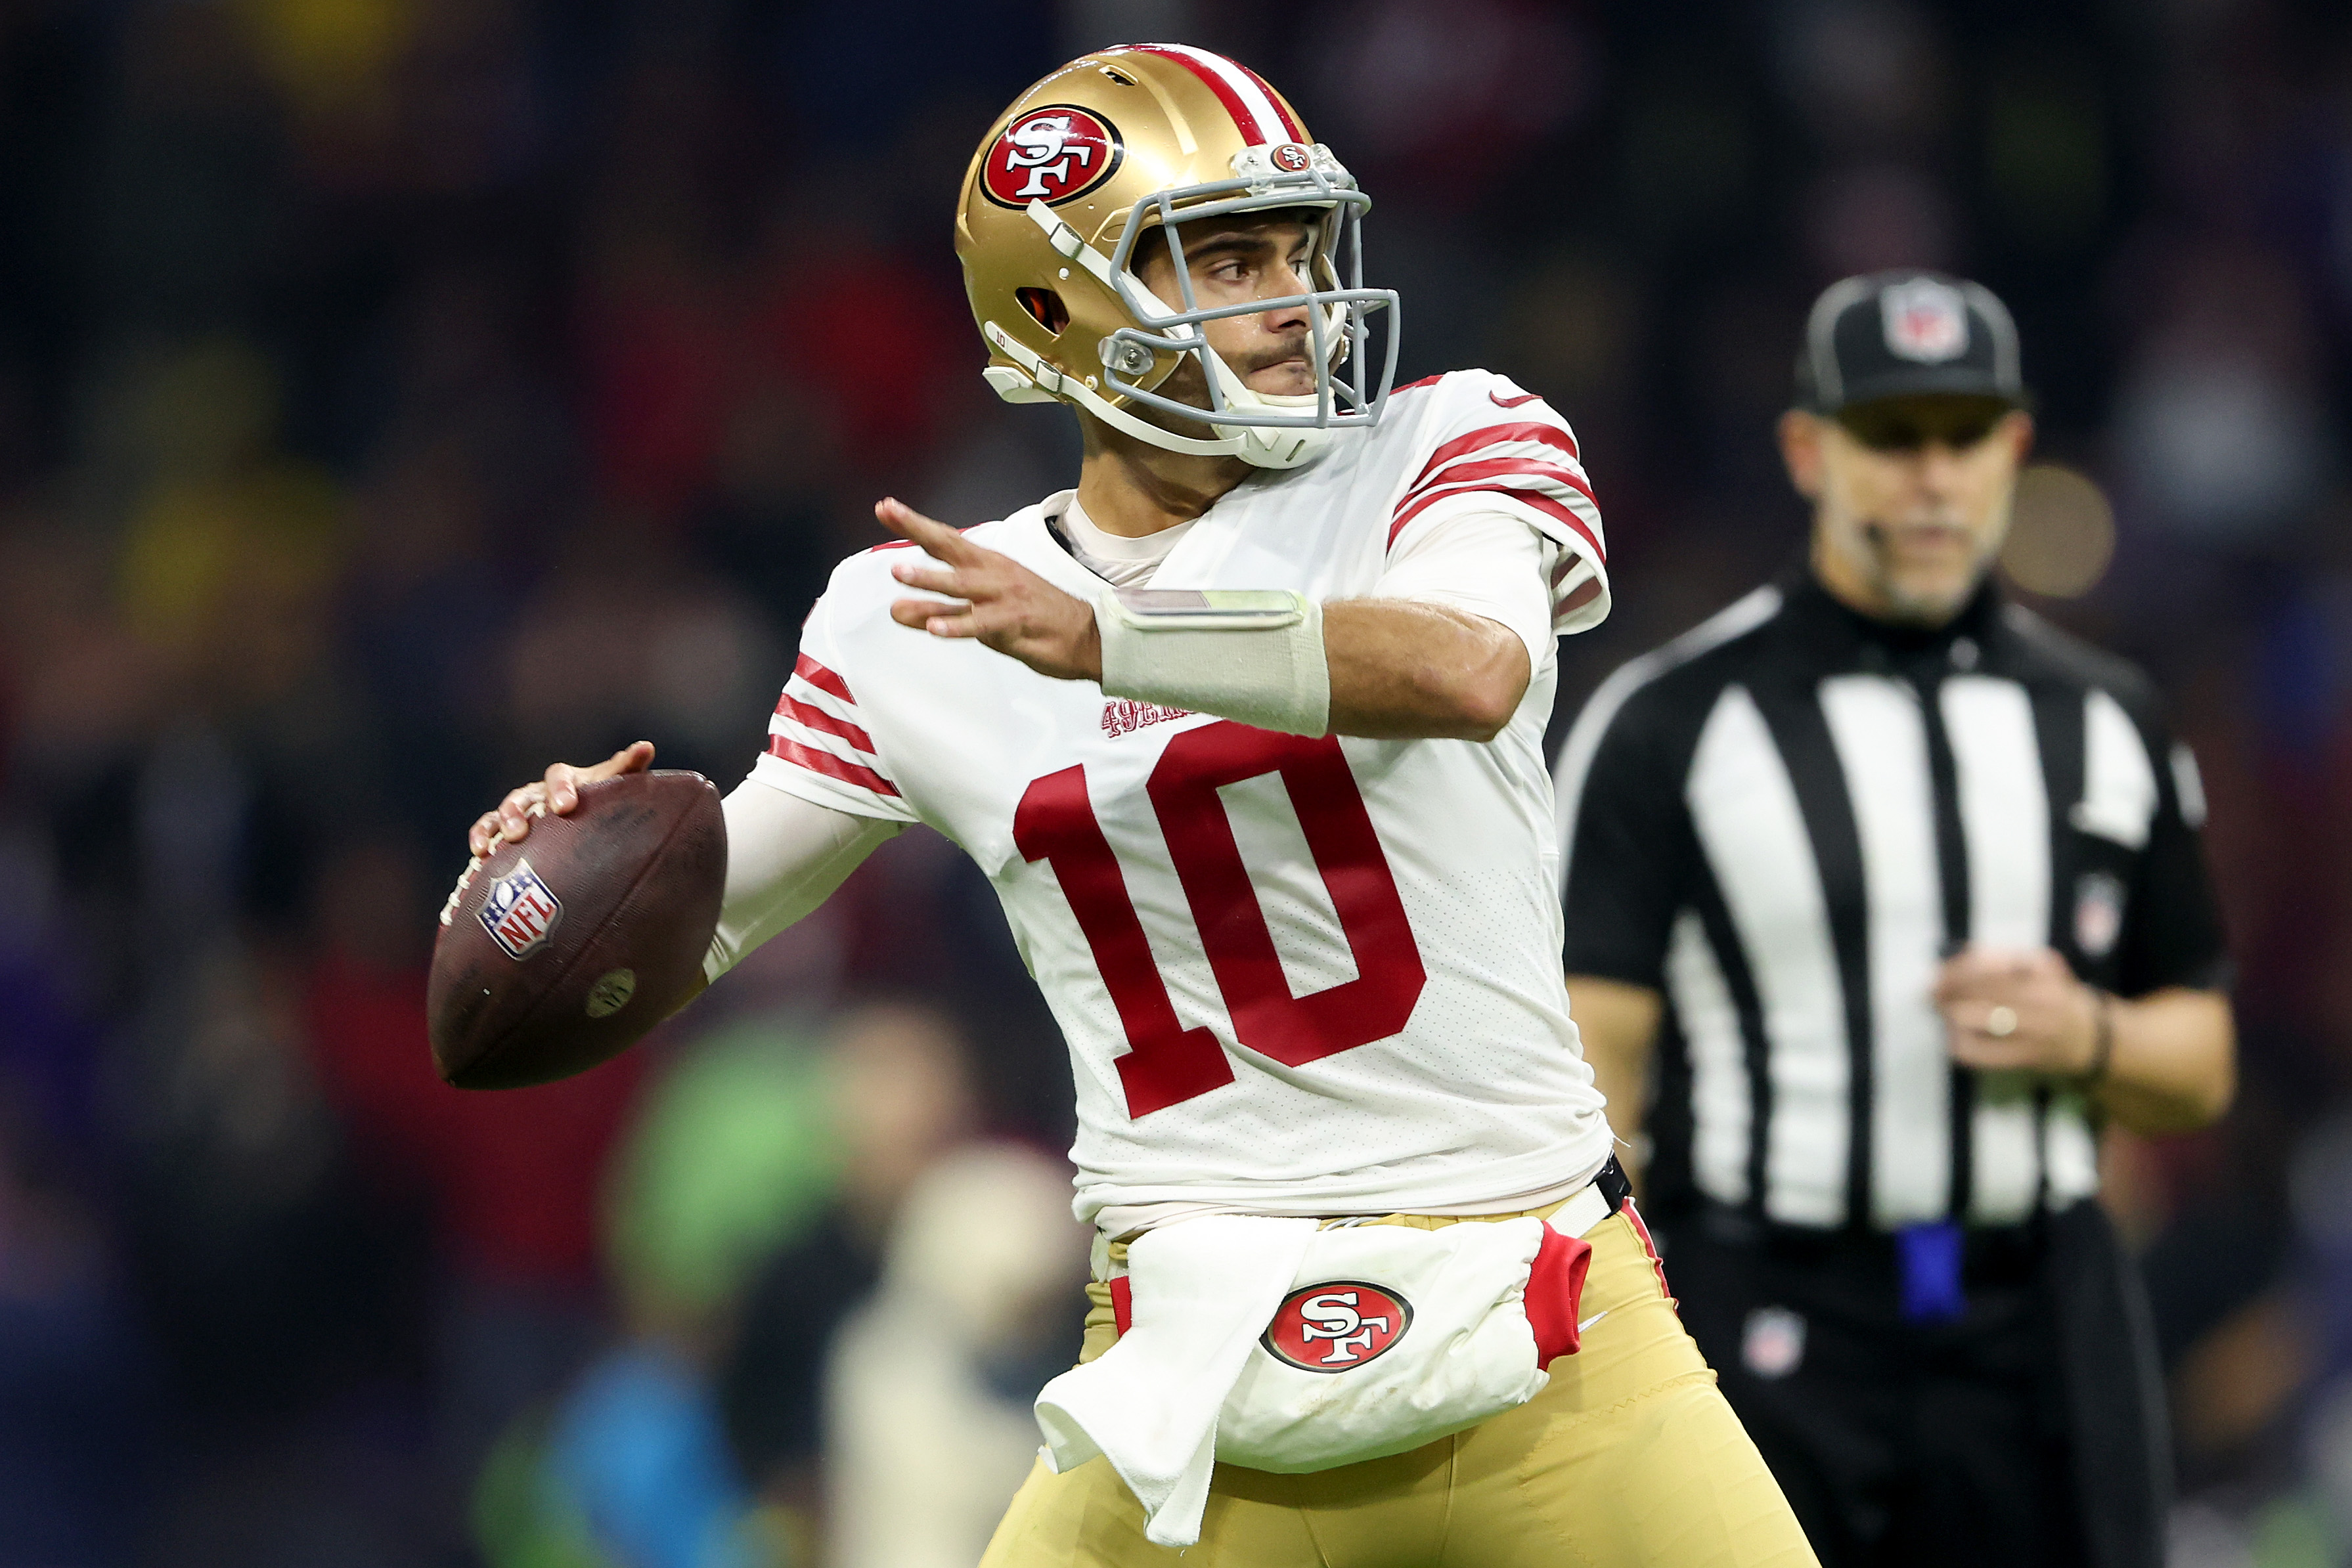 Quarterback Jimmy Garoppolo of the San Francisco 49ers passes in the game against the Arizona Cardinals at Estadio Azteca in Mexico City, Mexico, November 21, 2022. /CFP